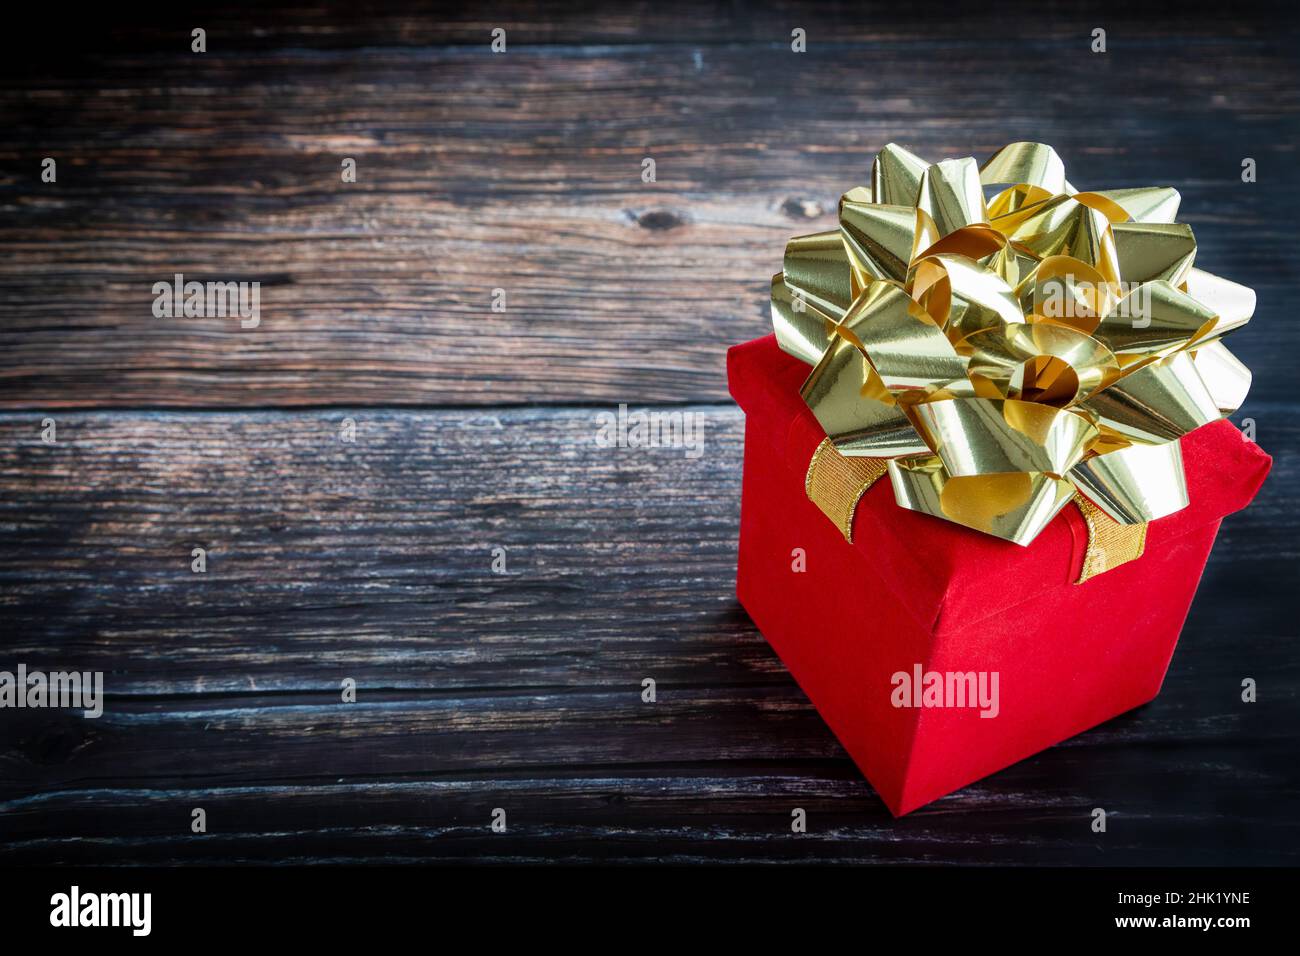 Red gift box on rustic wooden table with copy space, suitable for Christmas, Valentine's Day, special occasions Stock Photo